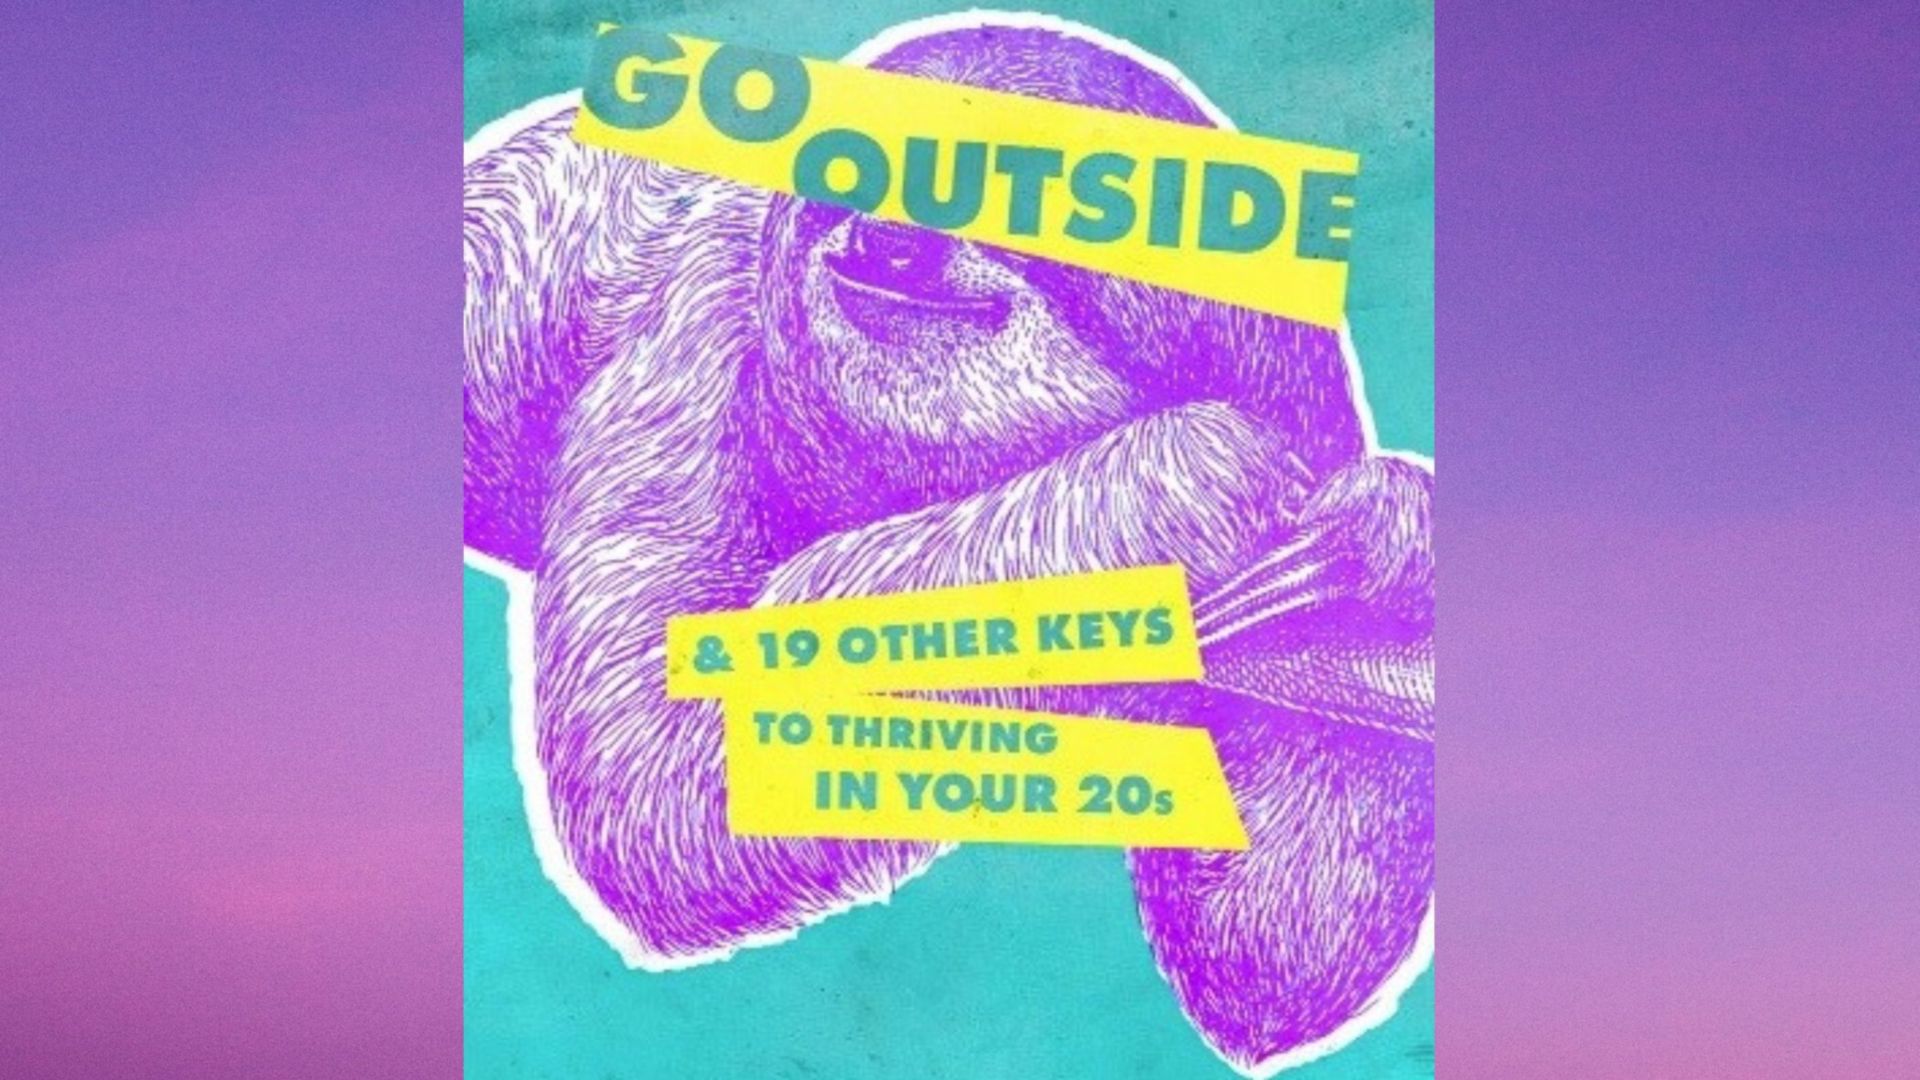 A review of the book 'Go Outside' by Jared and Becky Wilson